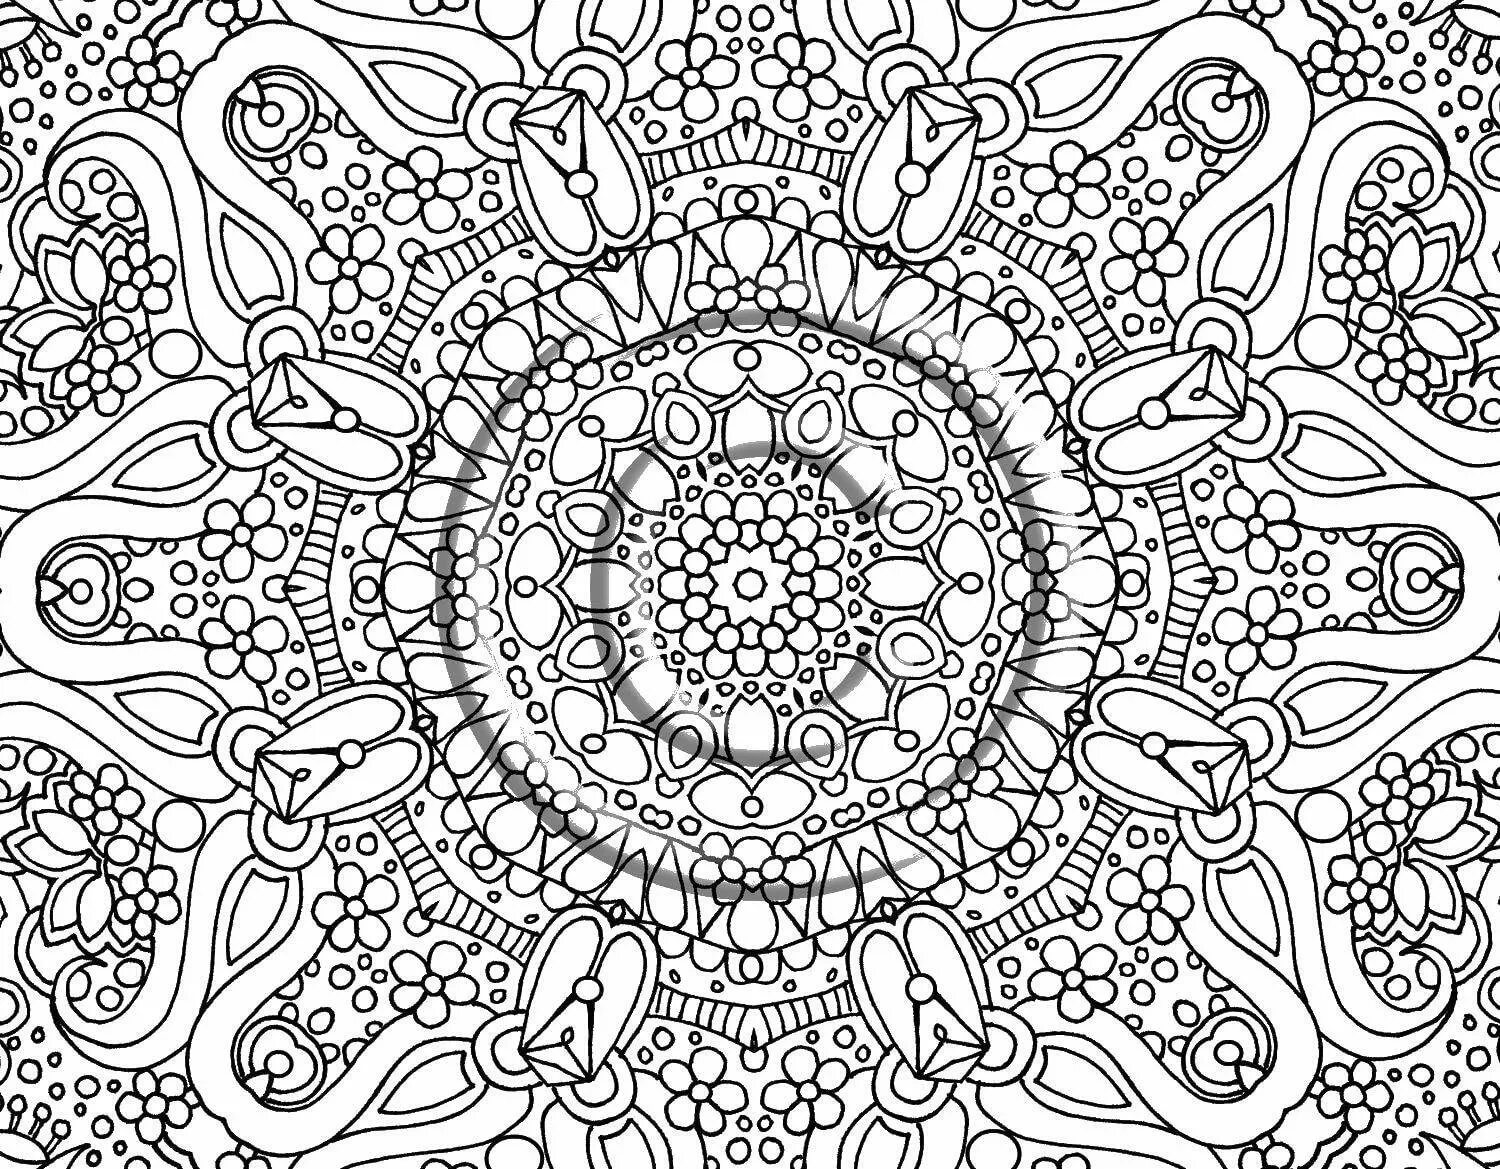 Exquisite relaxation coloring book for kids